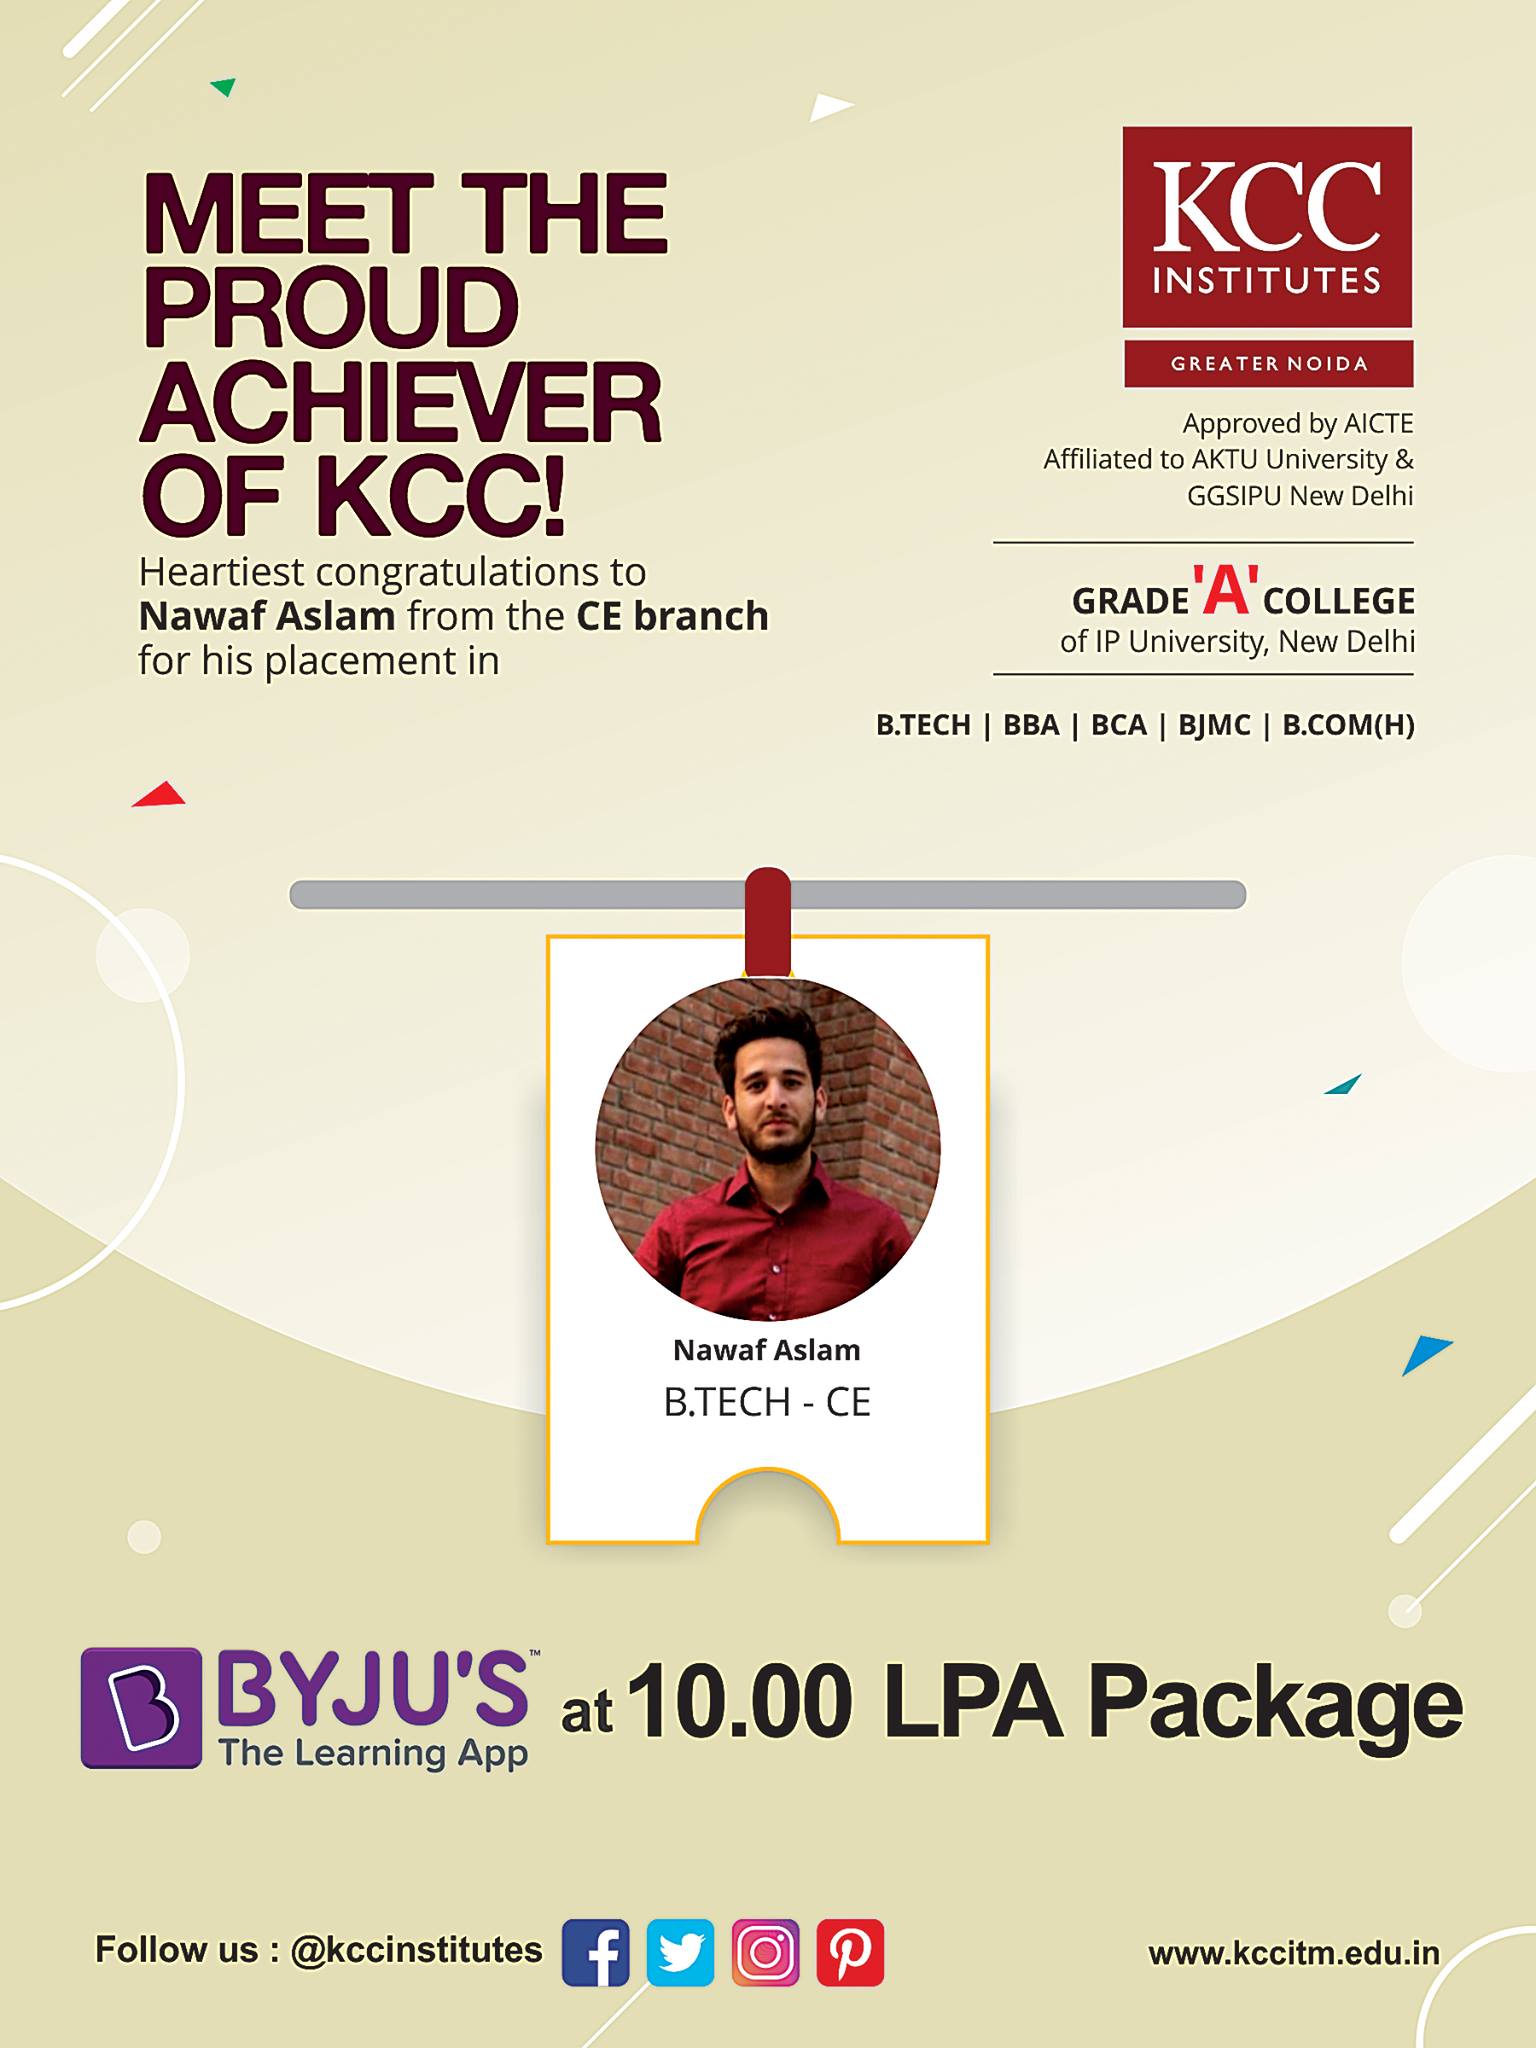 Nawaf Aslam (B.Tech CE Branch) placed in BYJU'S at the package of Rs. 10 LPA